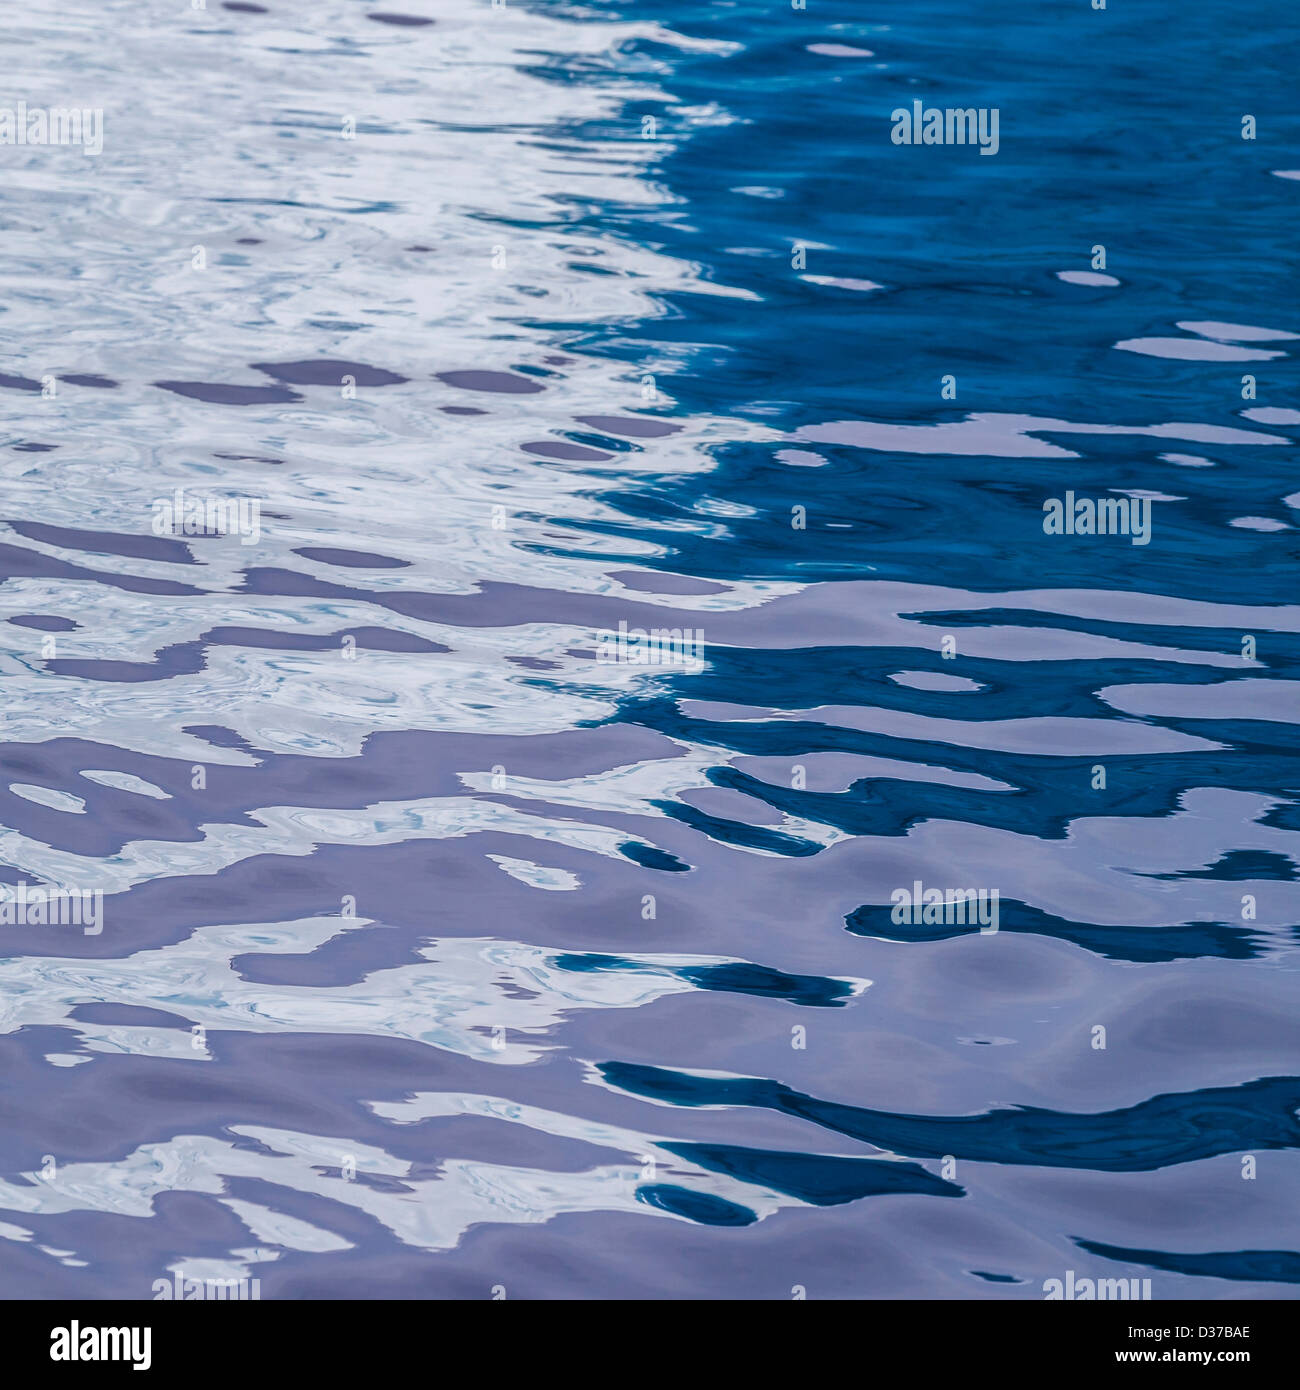 Ocean surface with ripples and patterns, Greenland Stock Photo